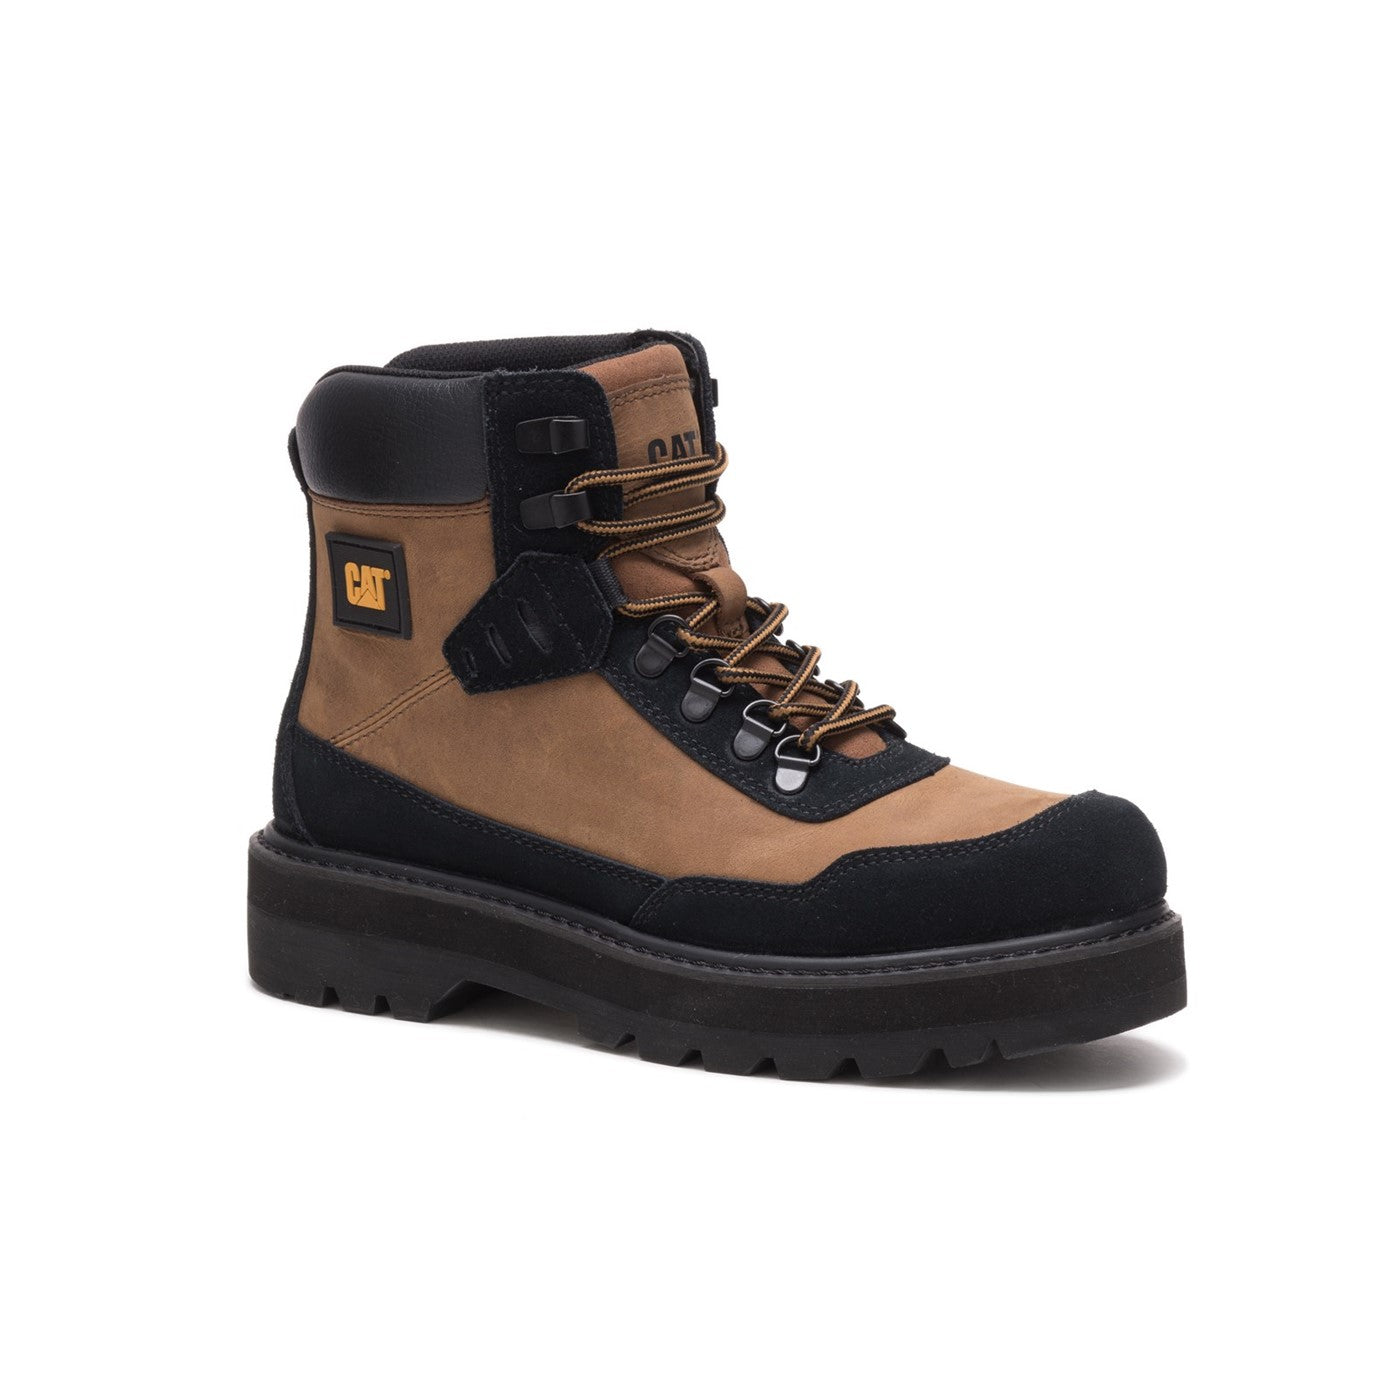 Women's CAT Footwear Conquer 2.0 Ankle Boots